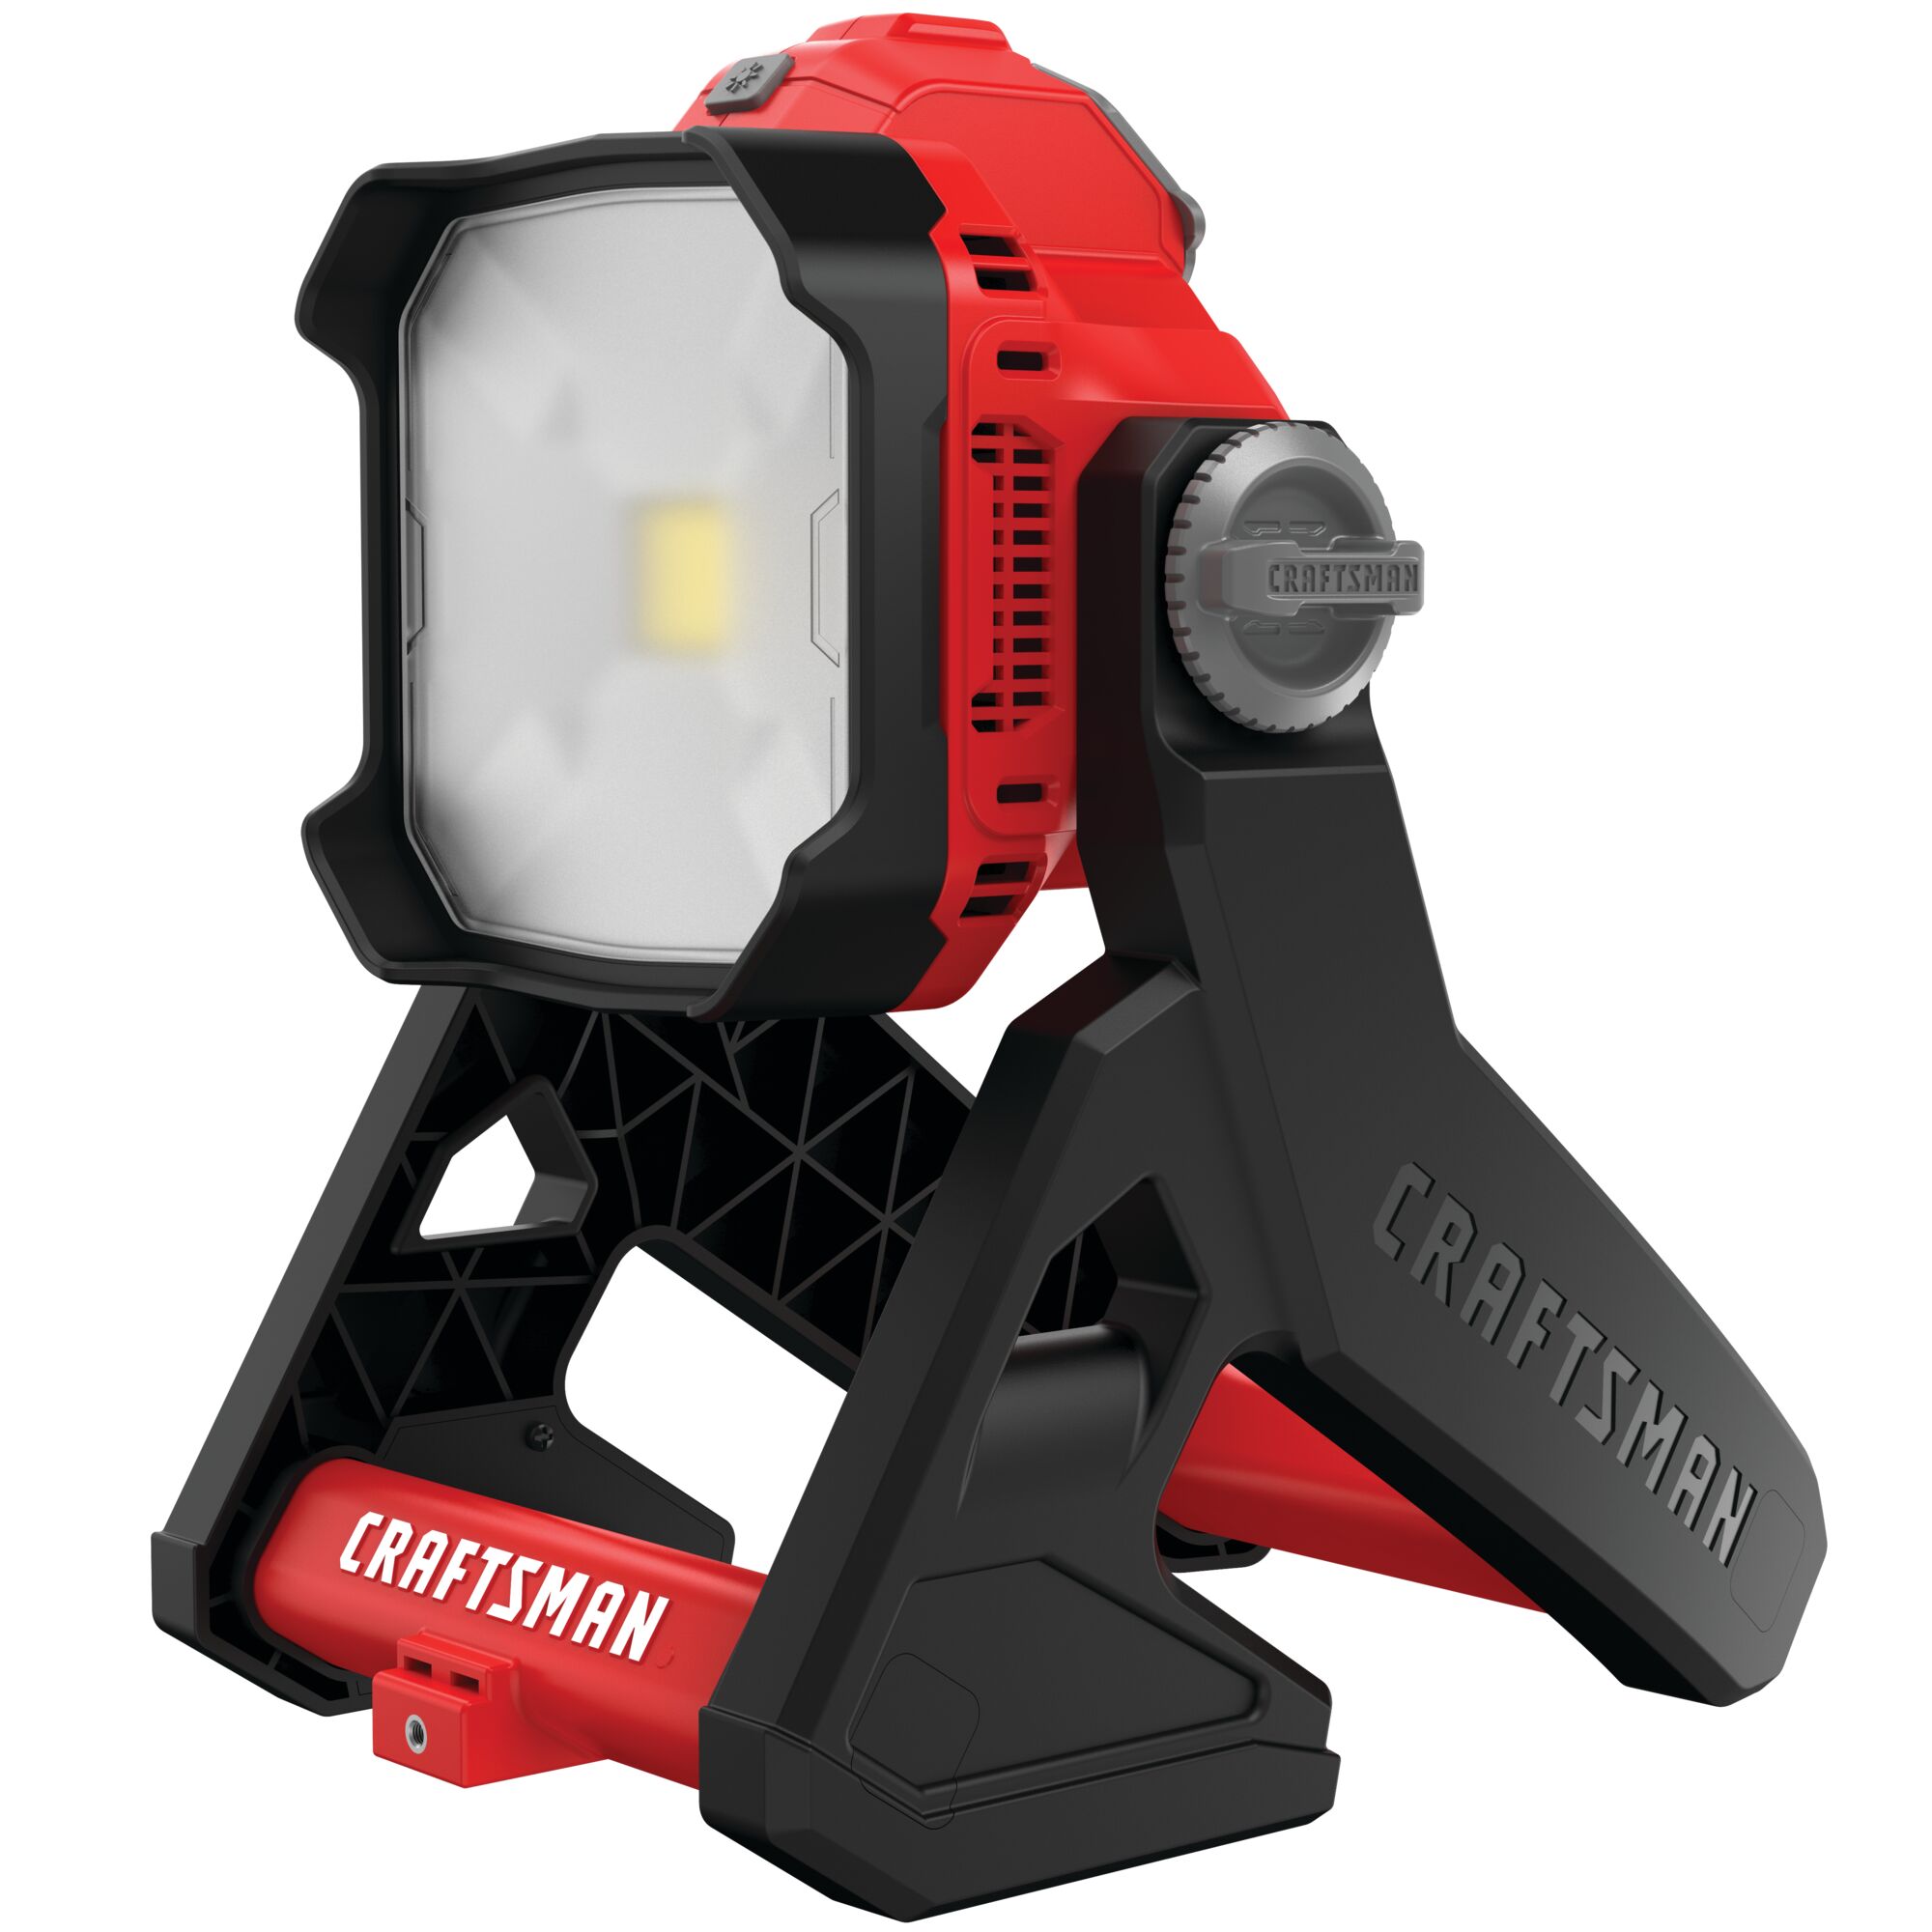 Cordless small area light tool only.